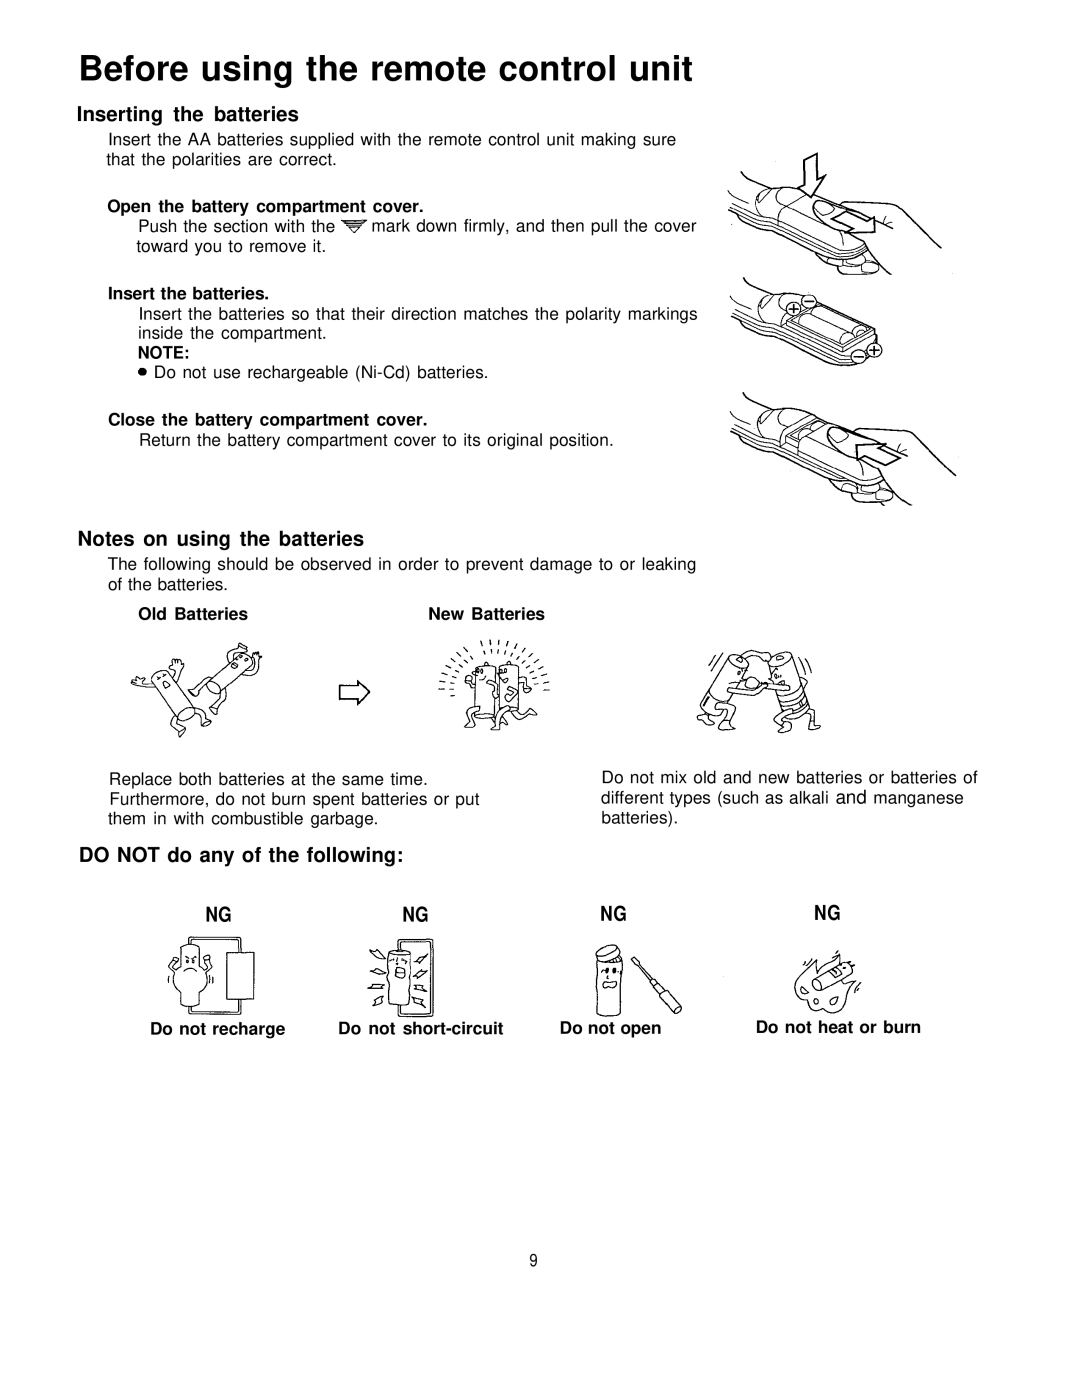 Panasonic PT-L795U manual Before using the remote control unit, Inserting the batteries, Notes on using the batteries 